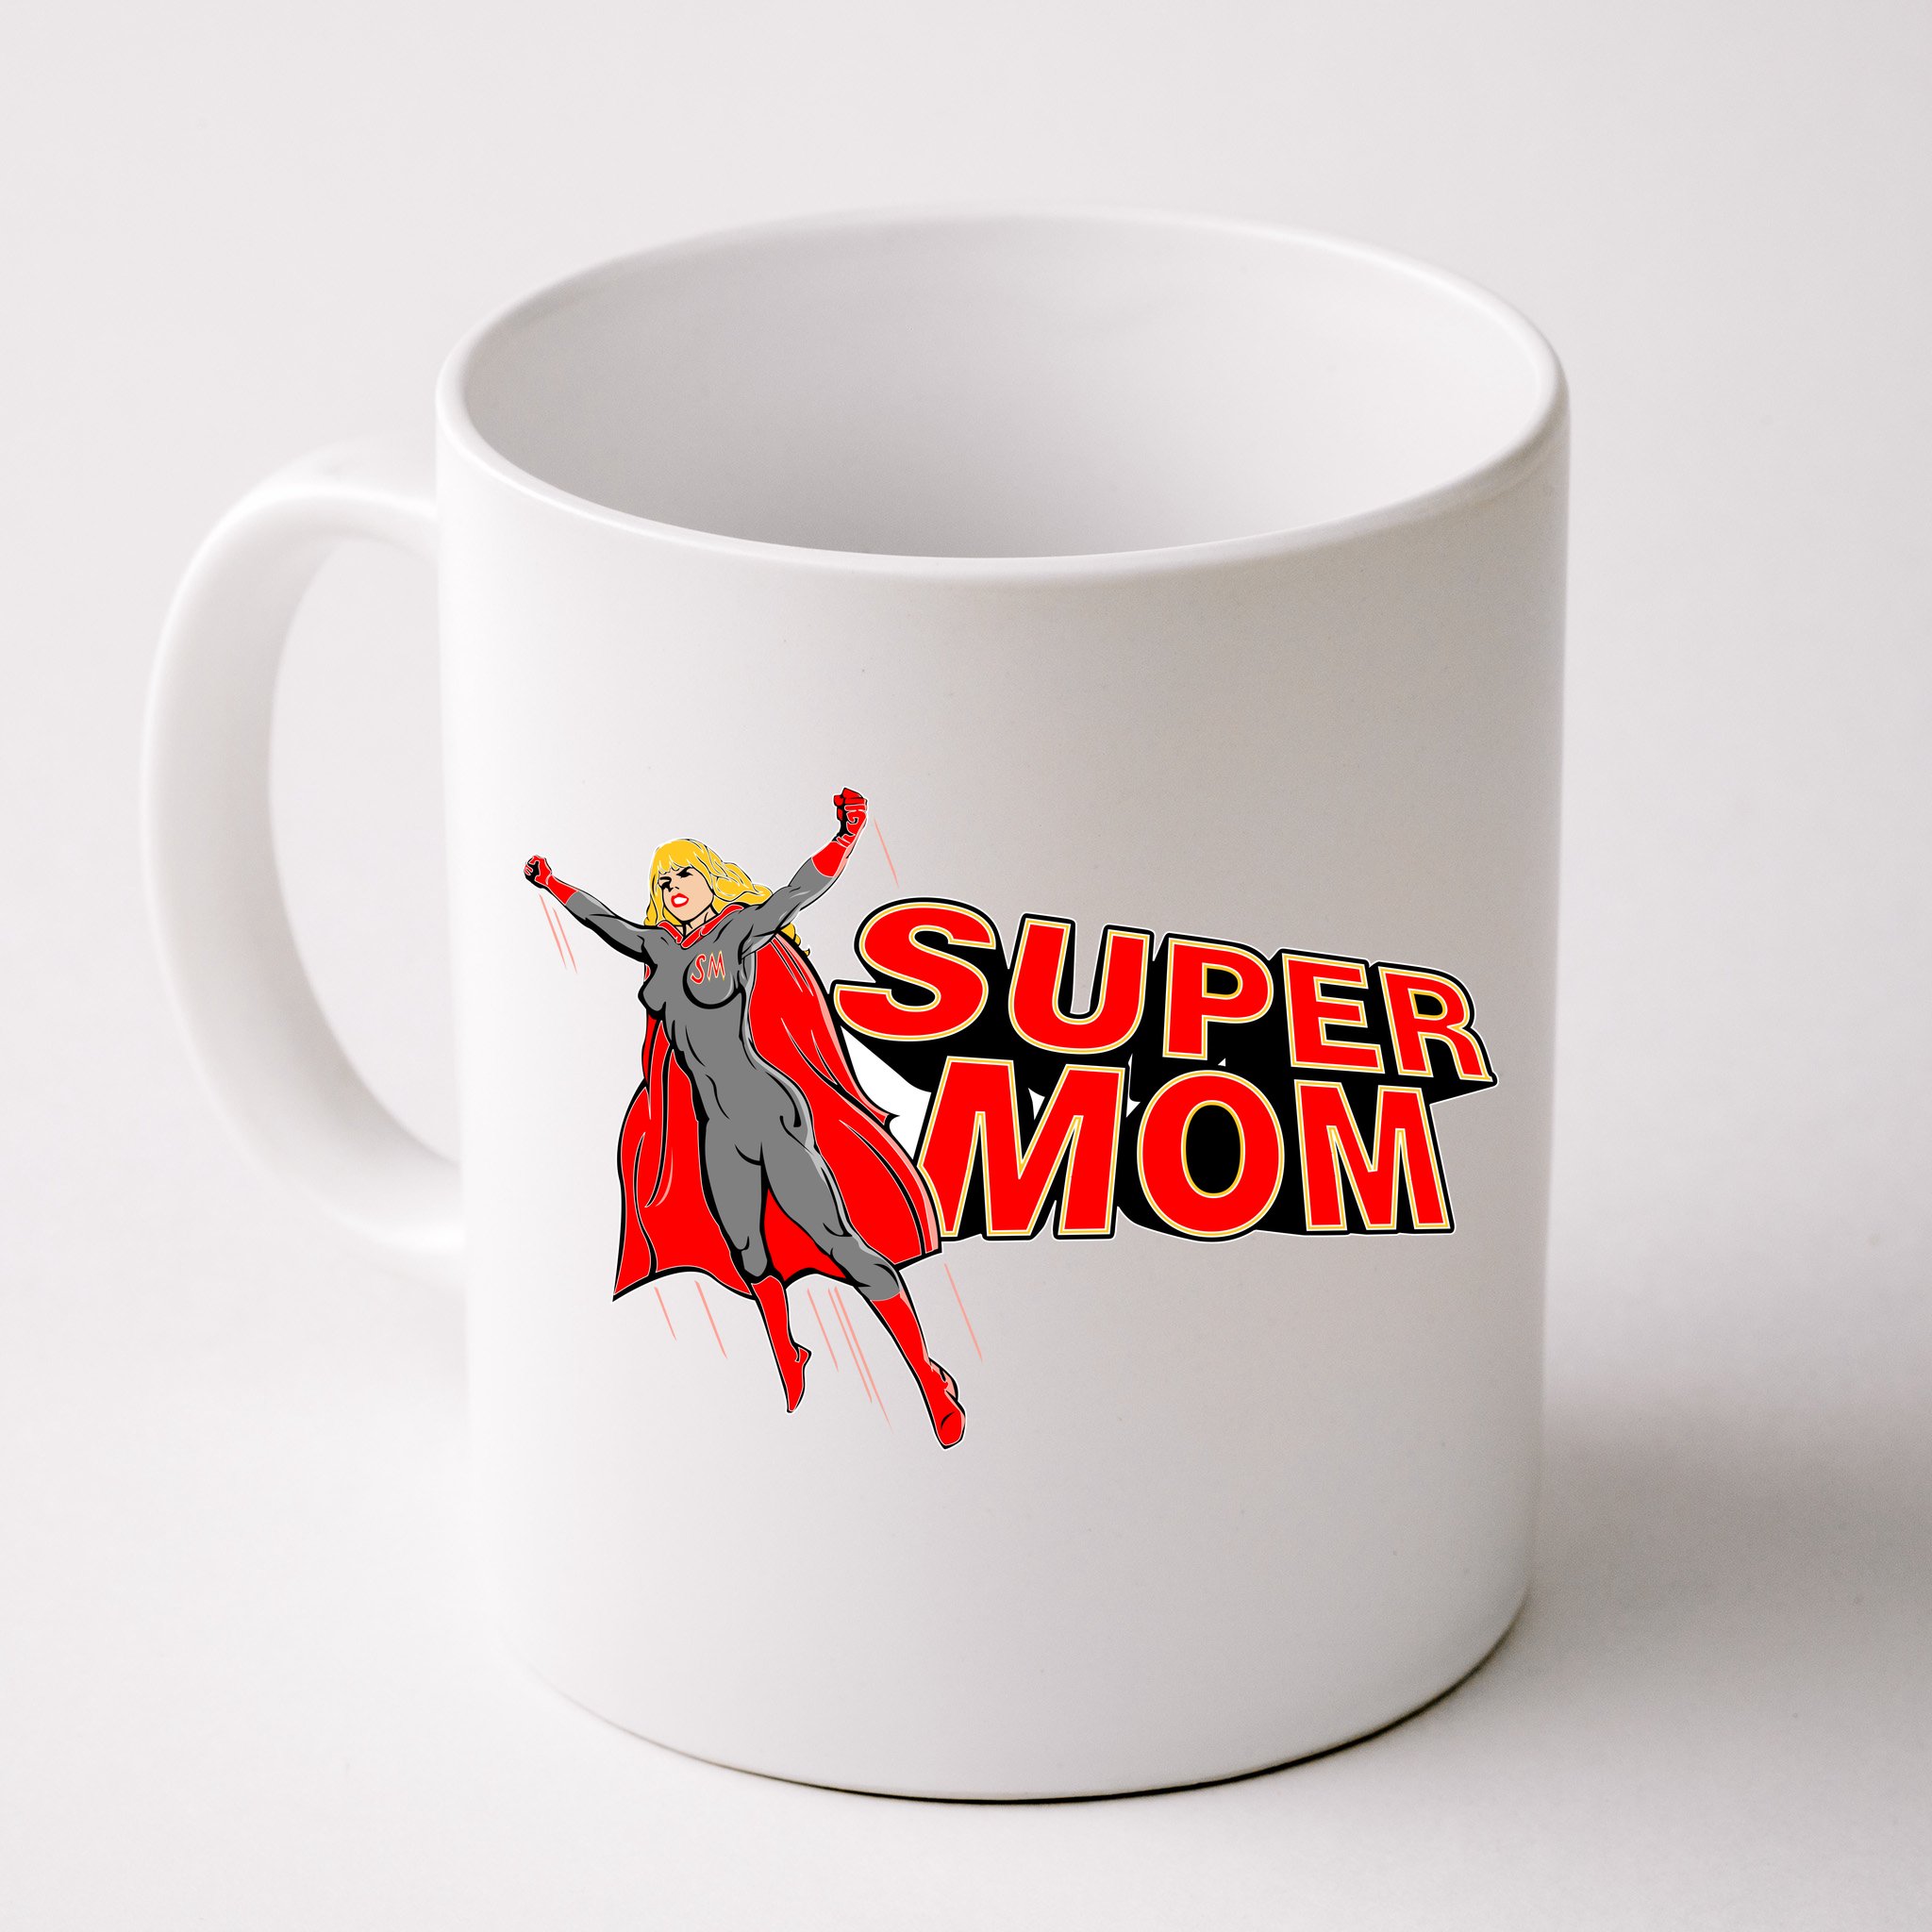 https://images3.teeshirtpalace.com/images/productImages/super-mom-figure--white-cfm-front.jpg